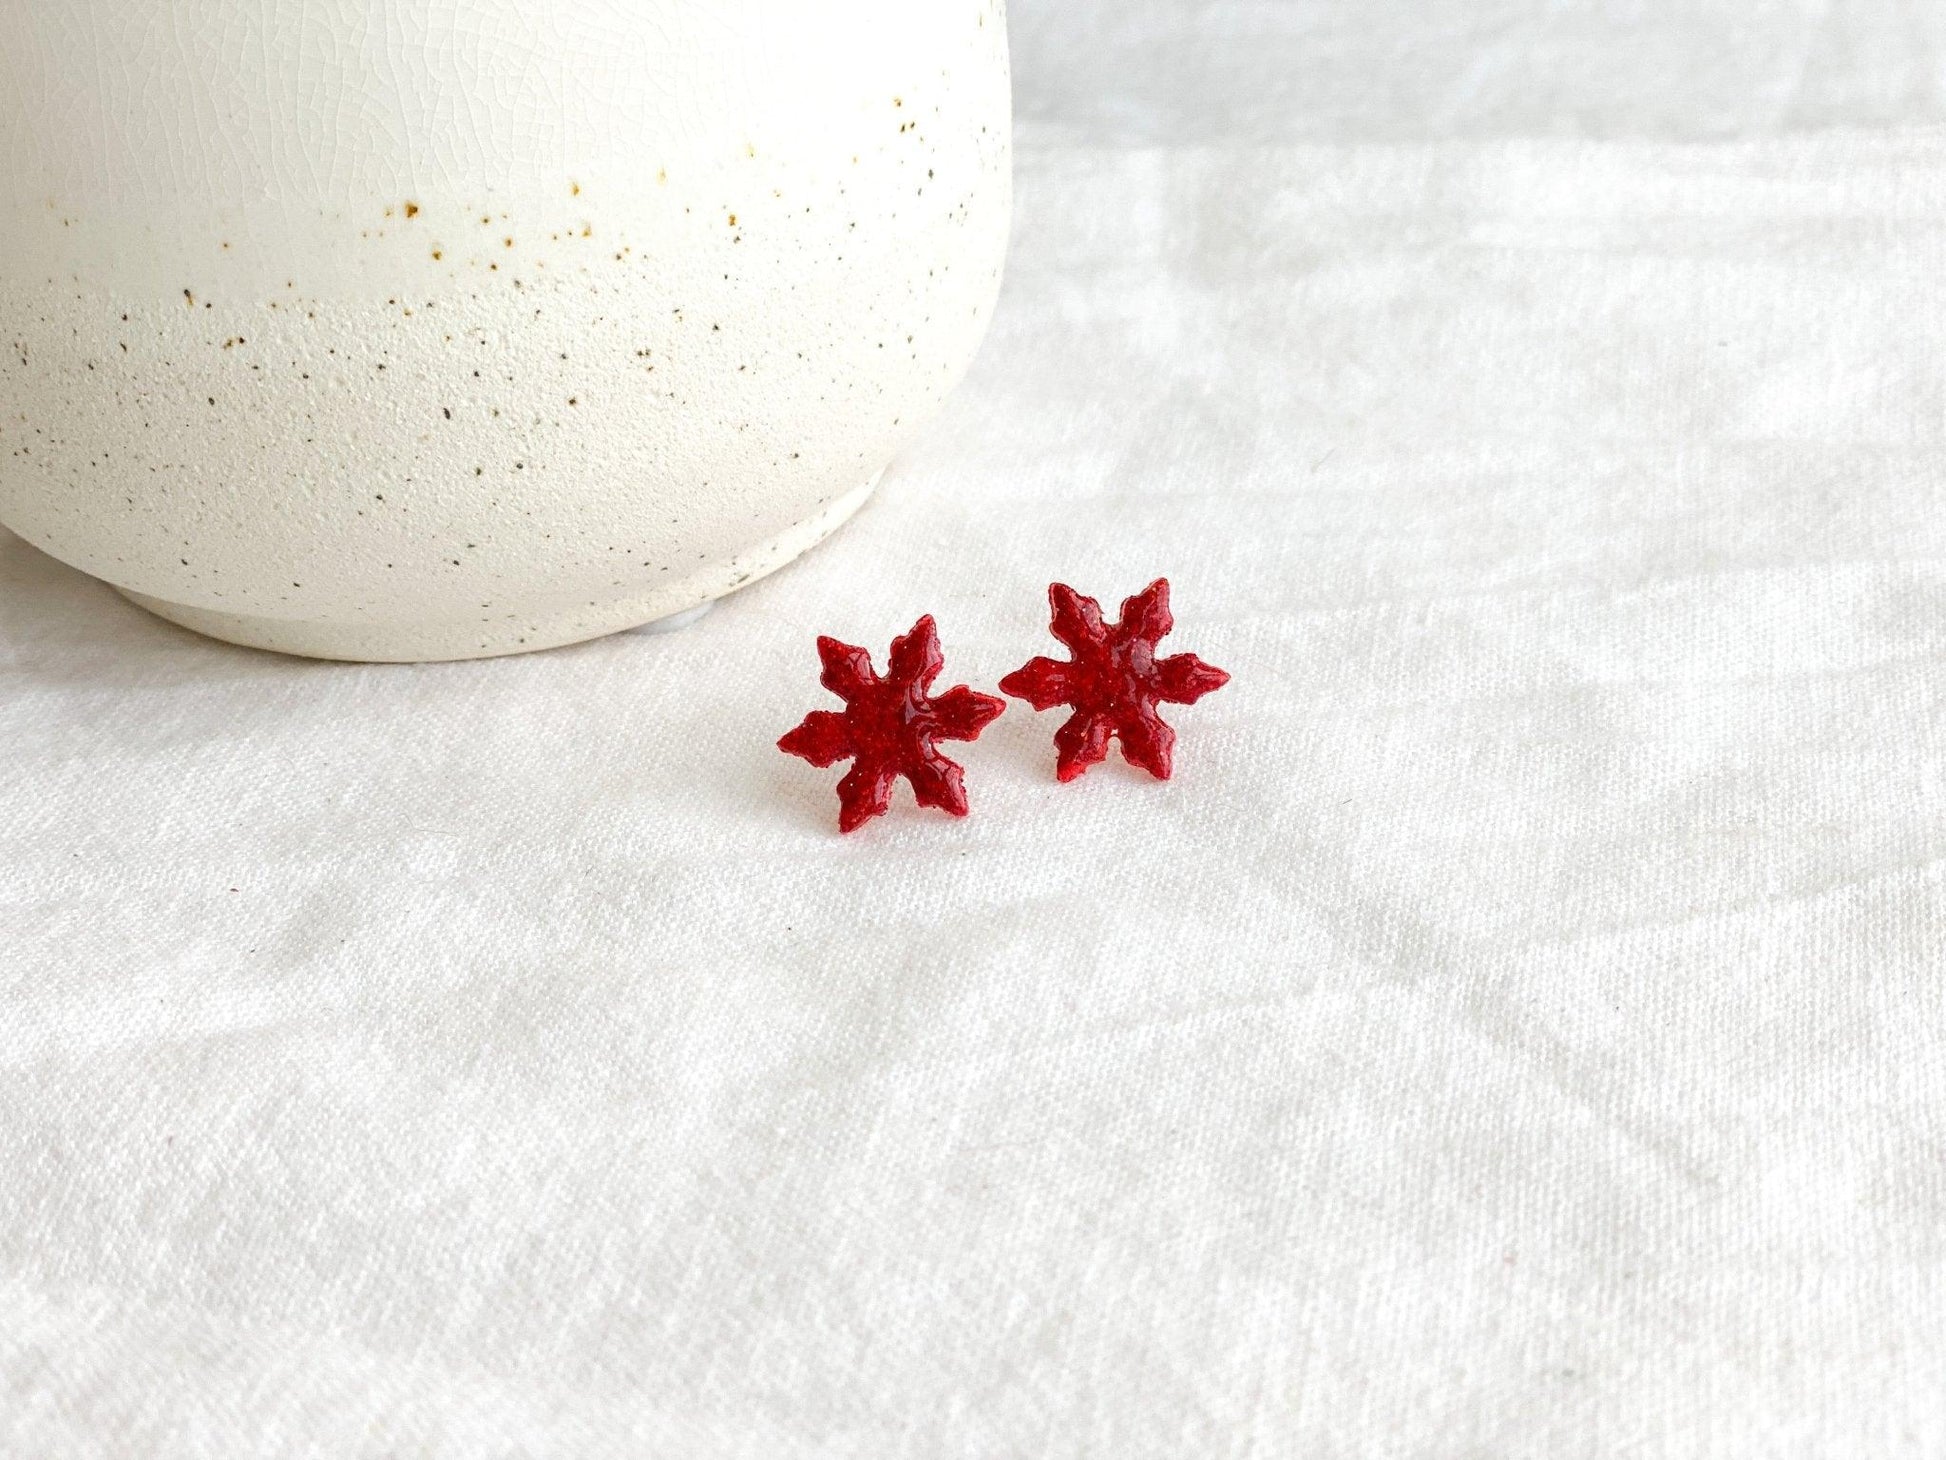 Small Handmade Red Sparkly Snowflake Stud Earrings on wihte linen cloth next to white ceramic jar